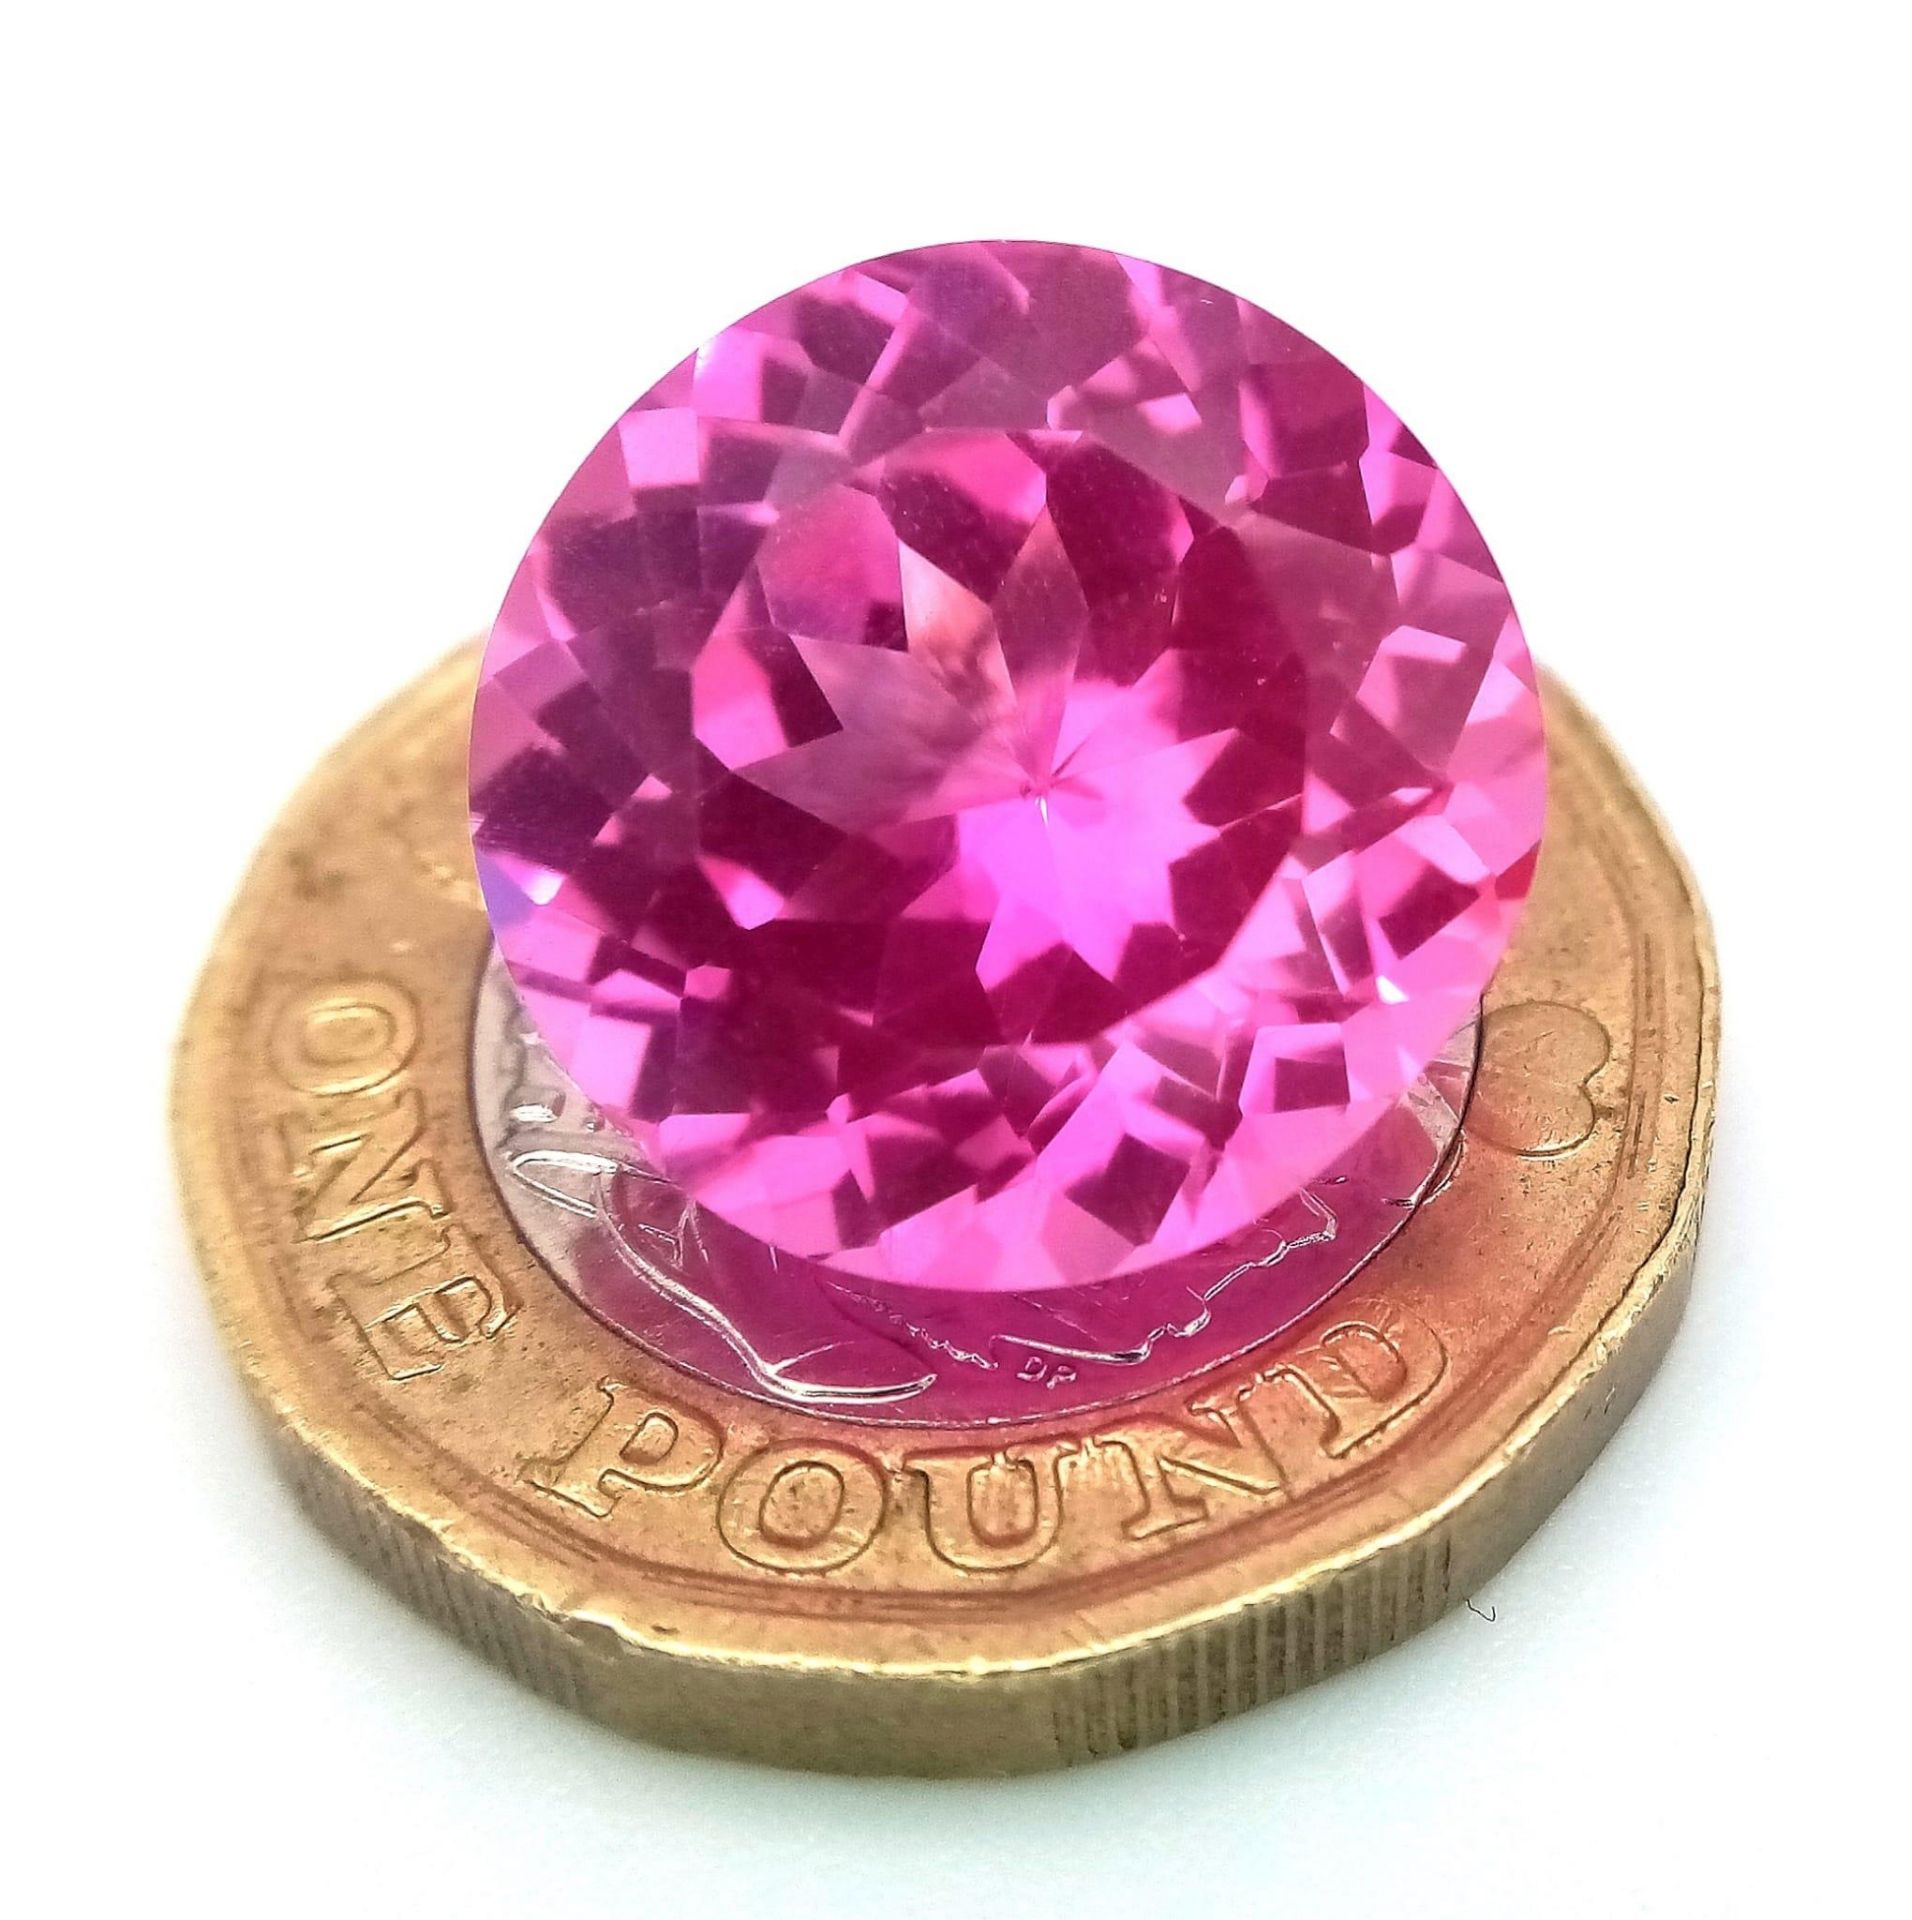 A Beautiful 18ct Pink Kunzite Gemstone. Round cut. No visible marks or inclusions. No certificate so - Image 2 of 4